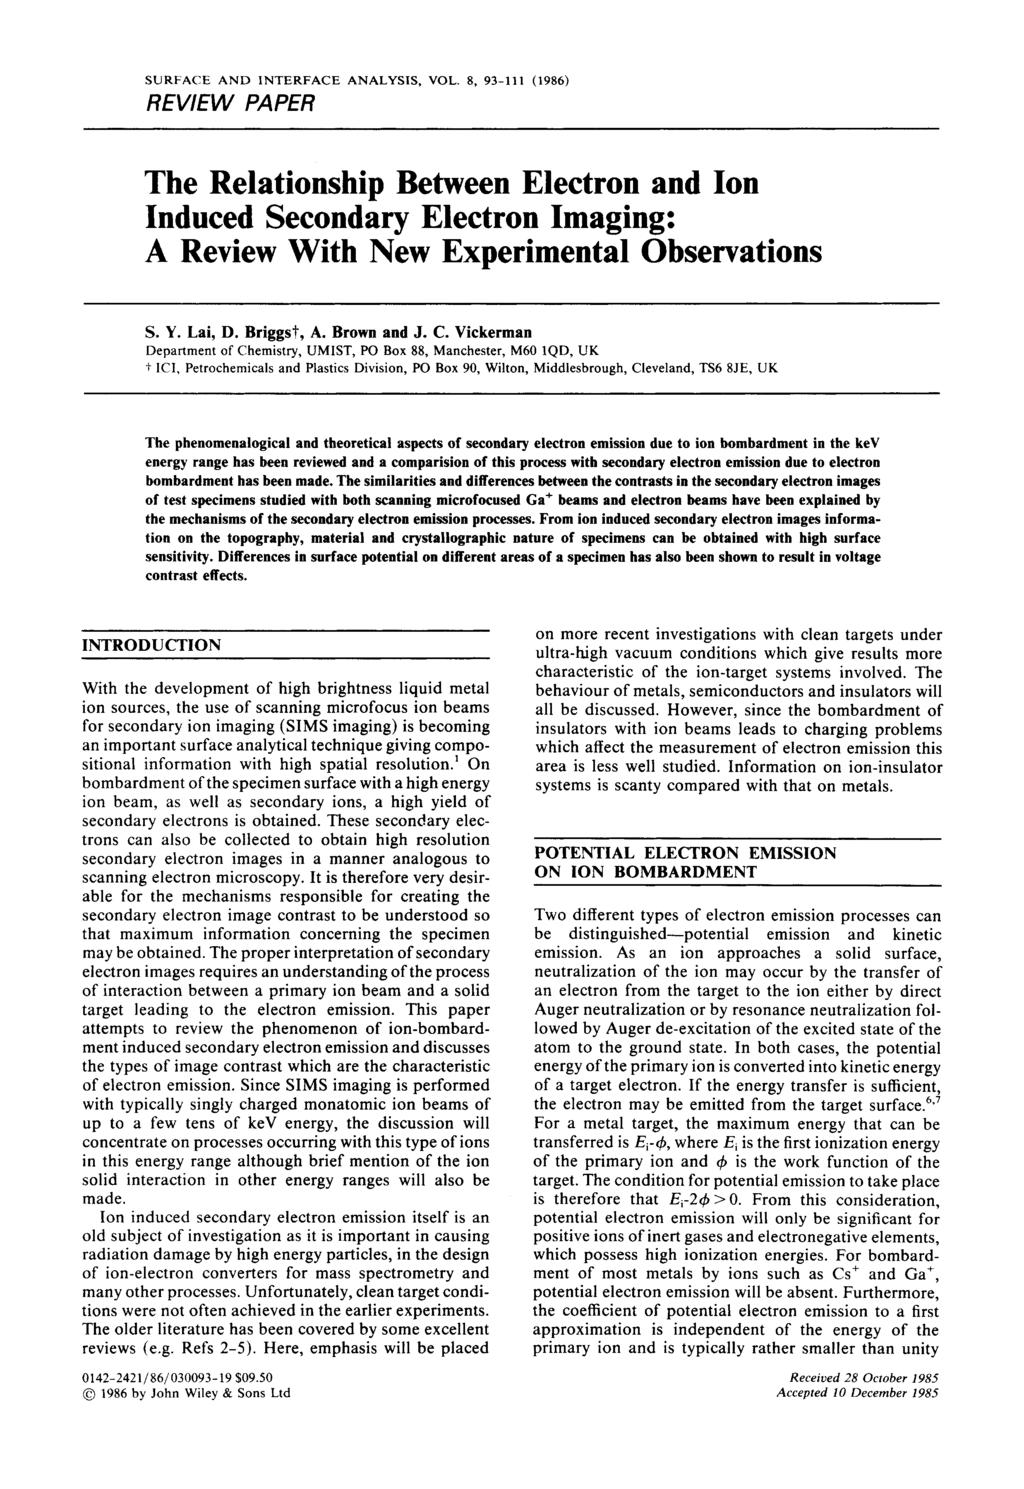 SURFACE AND INTERFACE ANALYSIS, VOL. 8, 93-111 (1986) REVIEW PAPER The Relationship Between Electron and Ion Induced Secondary Electron Imaging: A Review With New Experimental Observations S. Y.